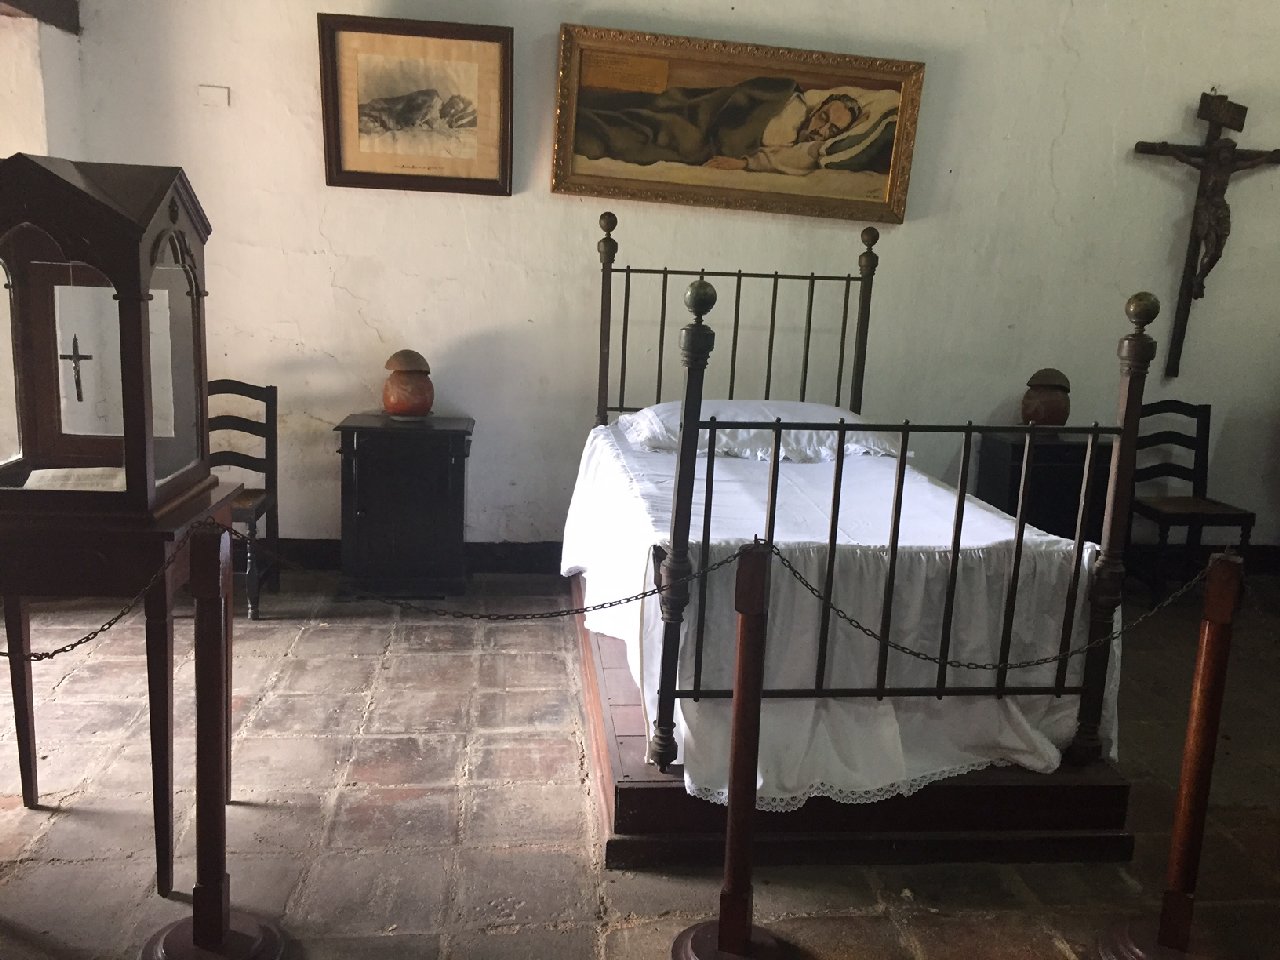 The bed where poet Ruben Dario died an agonising death